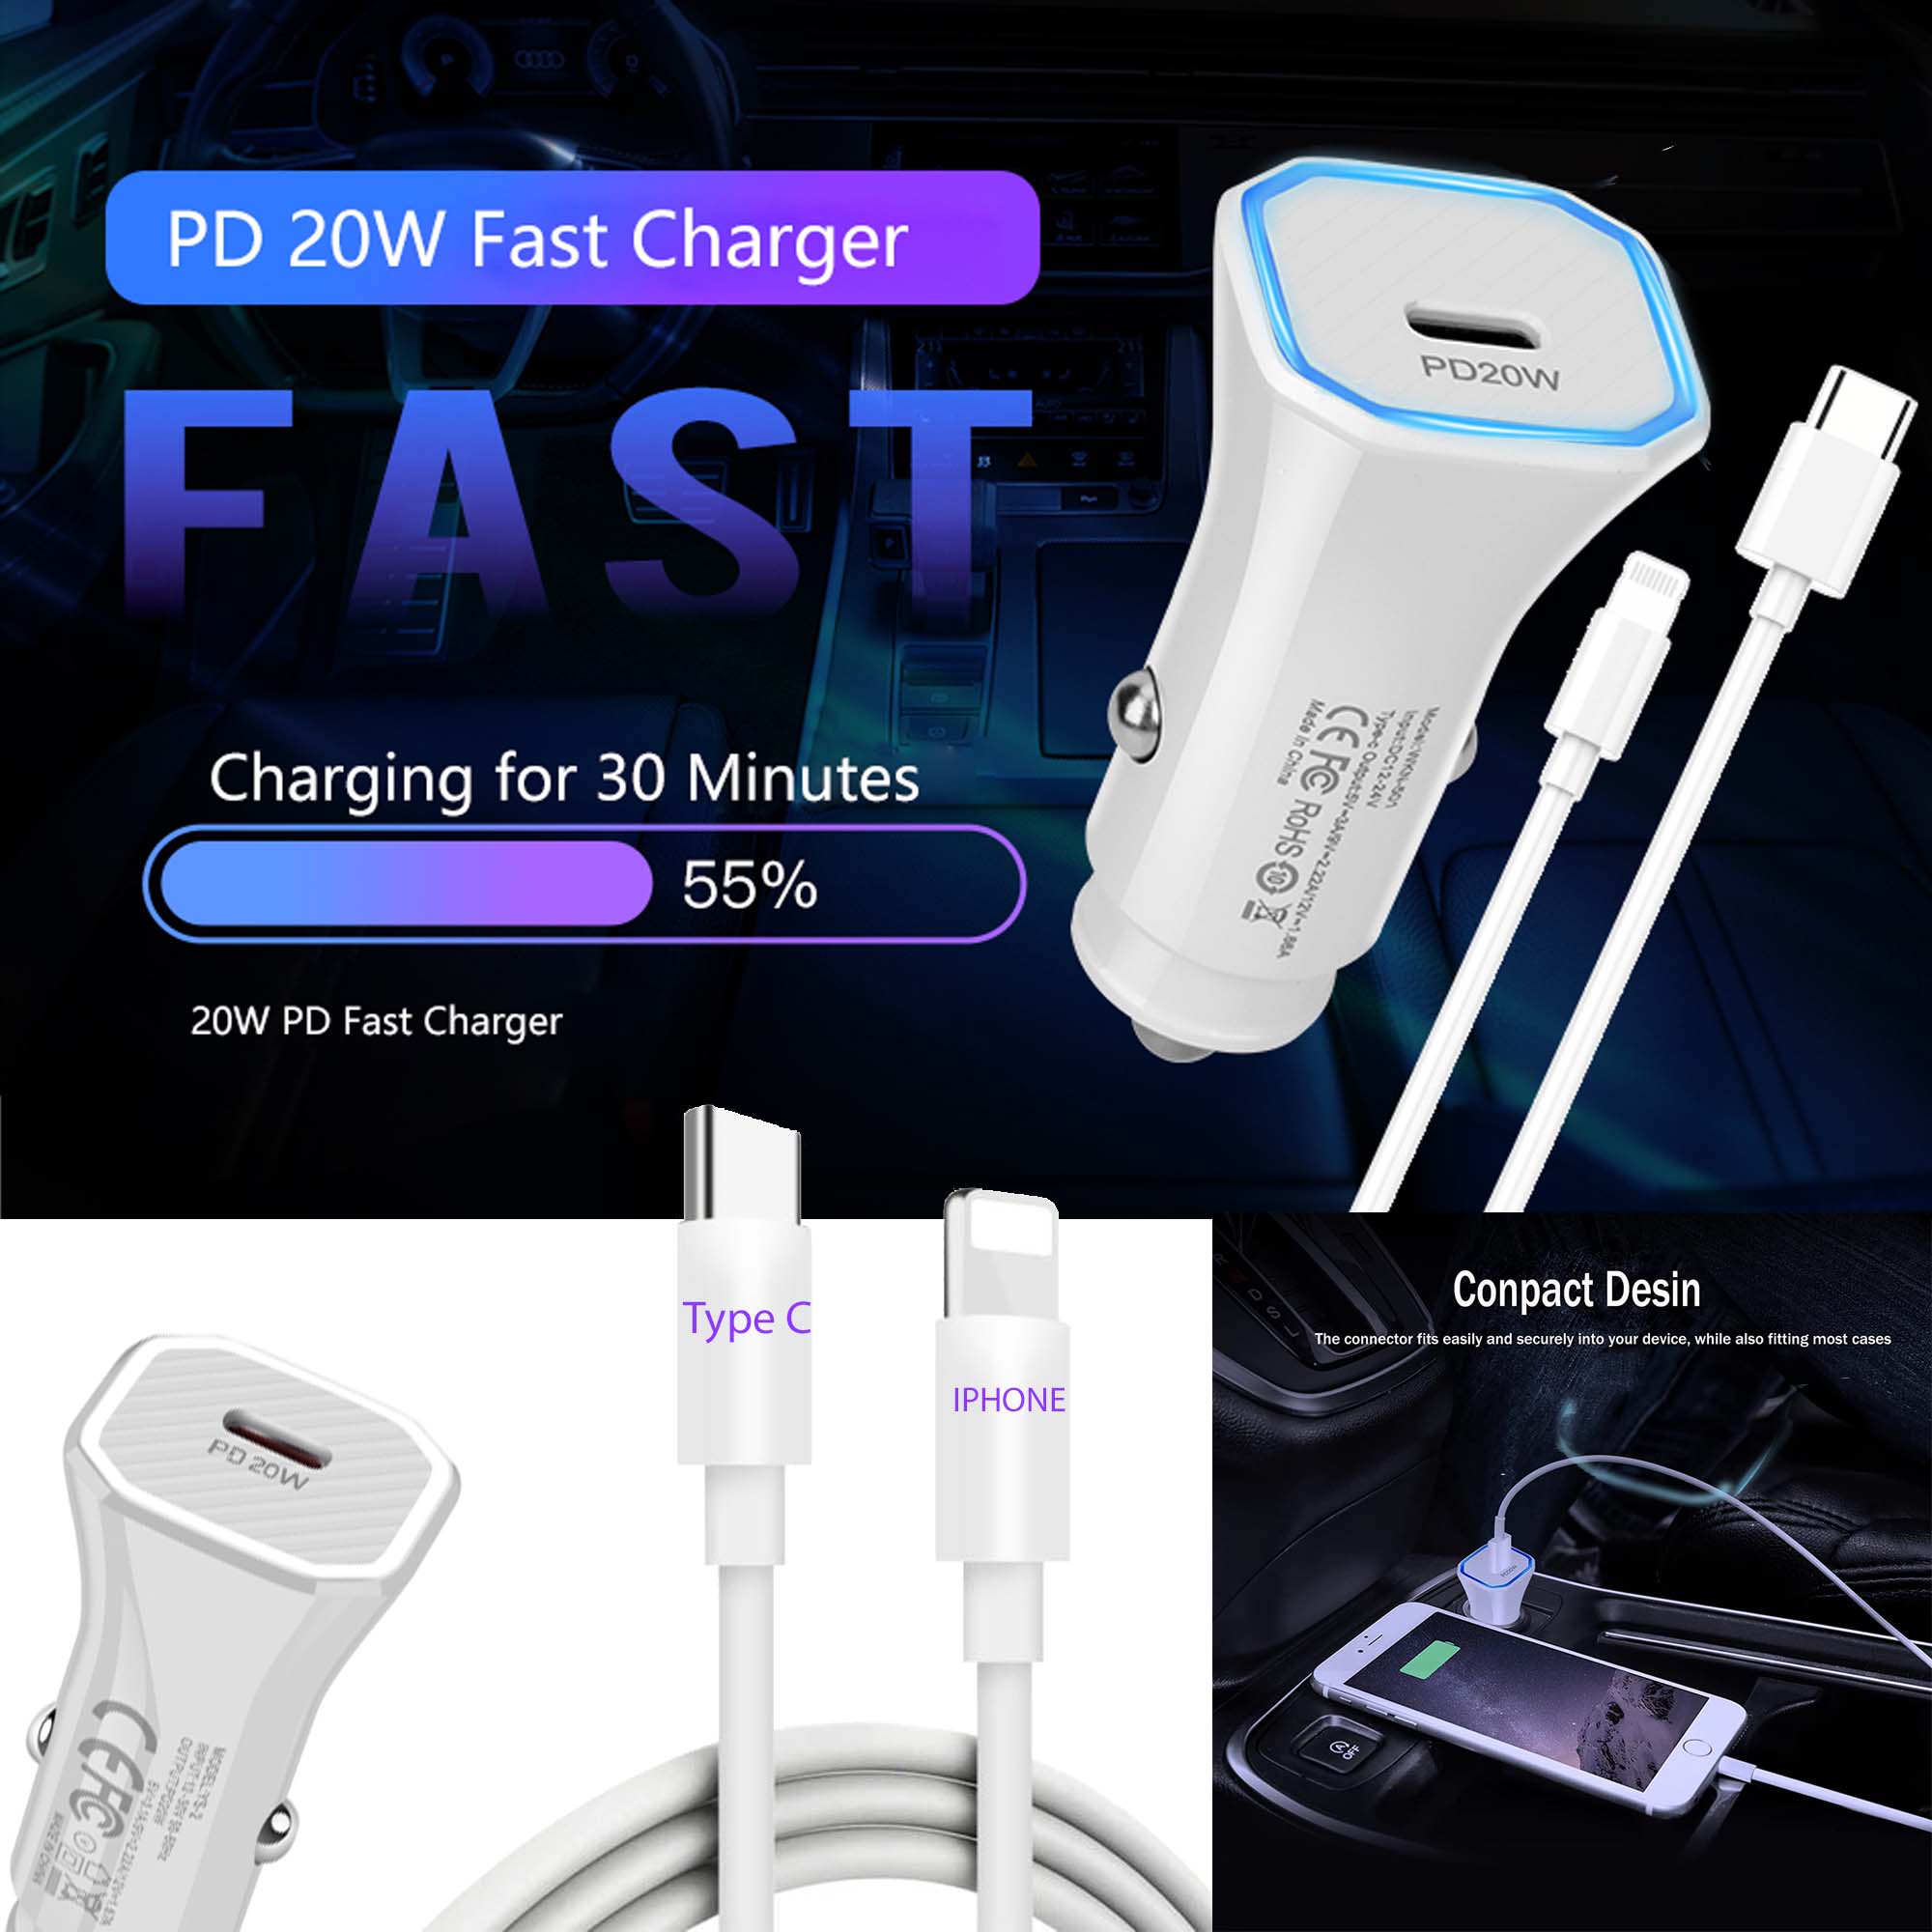 USB+C+Car+Charger+with+1+USB+C+Port+20W+Fast+Charger+Compatible+with+iPhone+13+Pro+Max+13+12+Pro+12